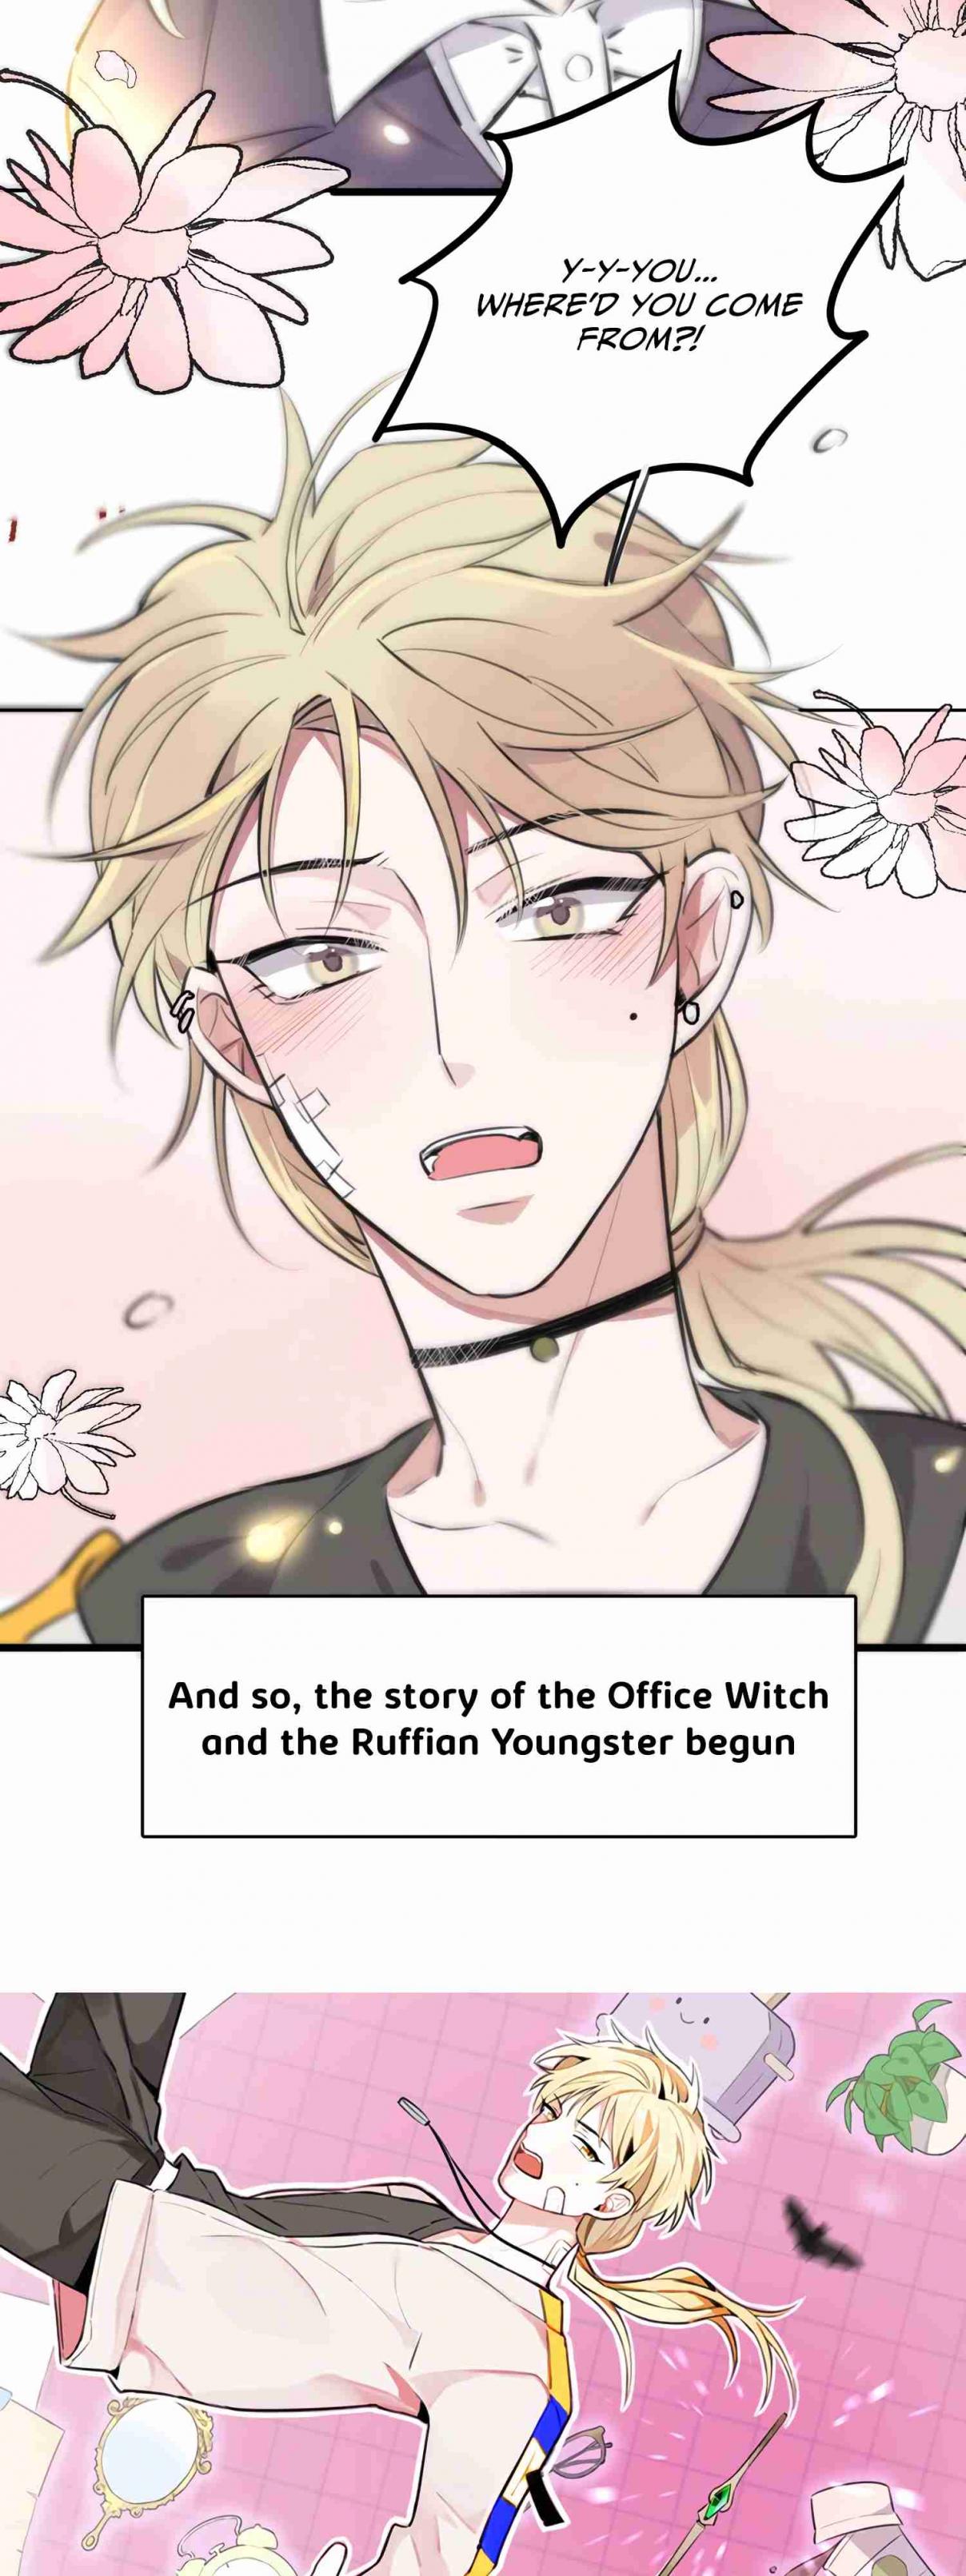 Office Witch Falls in Love Ch. 2